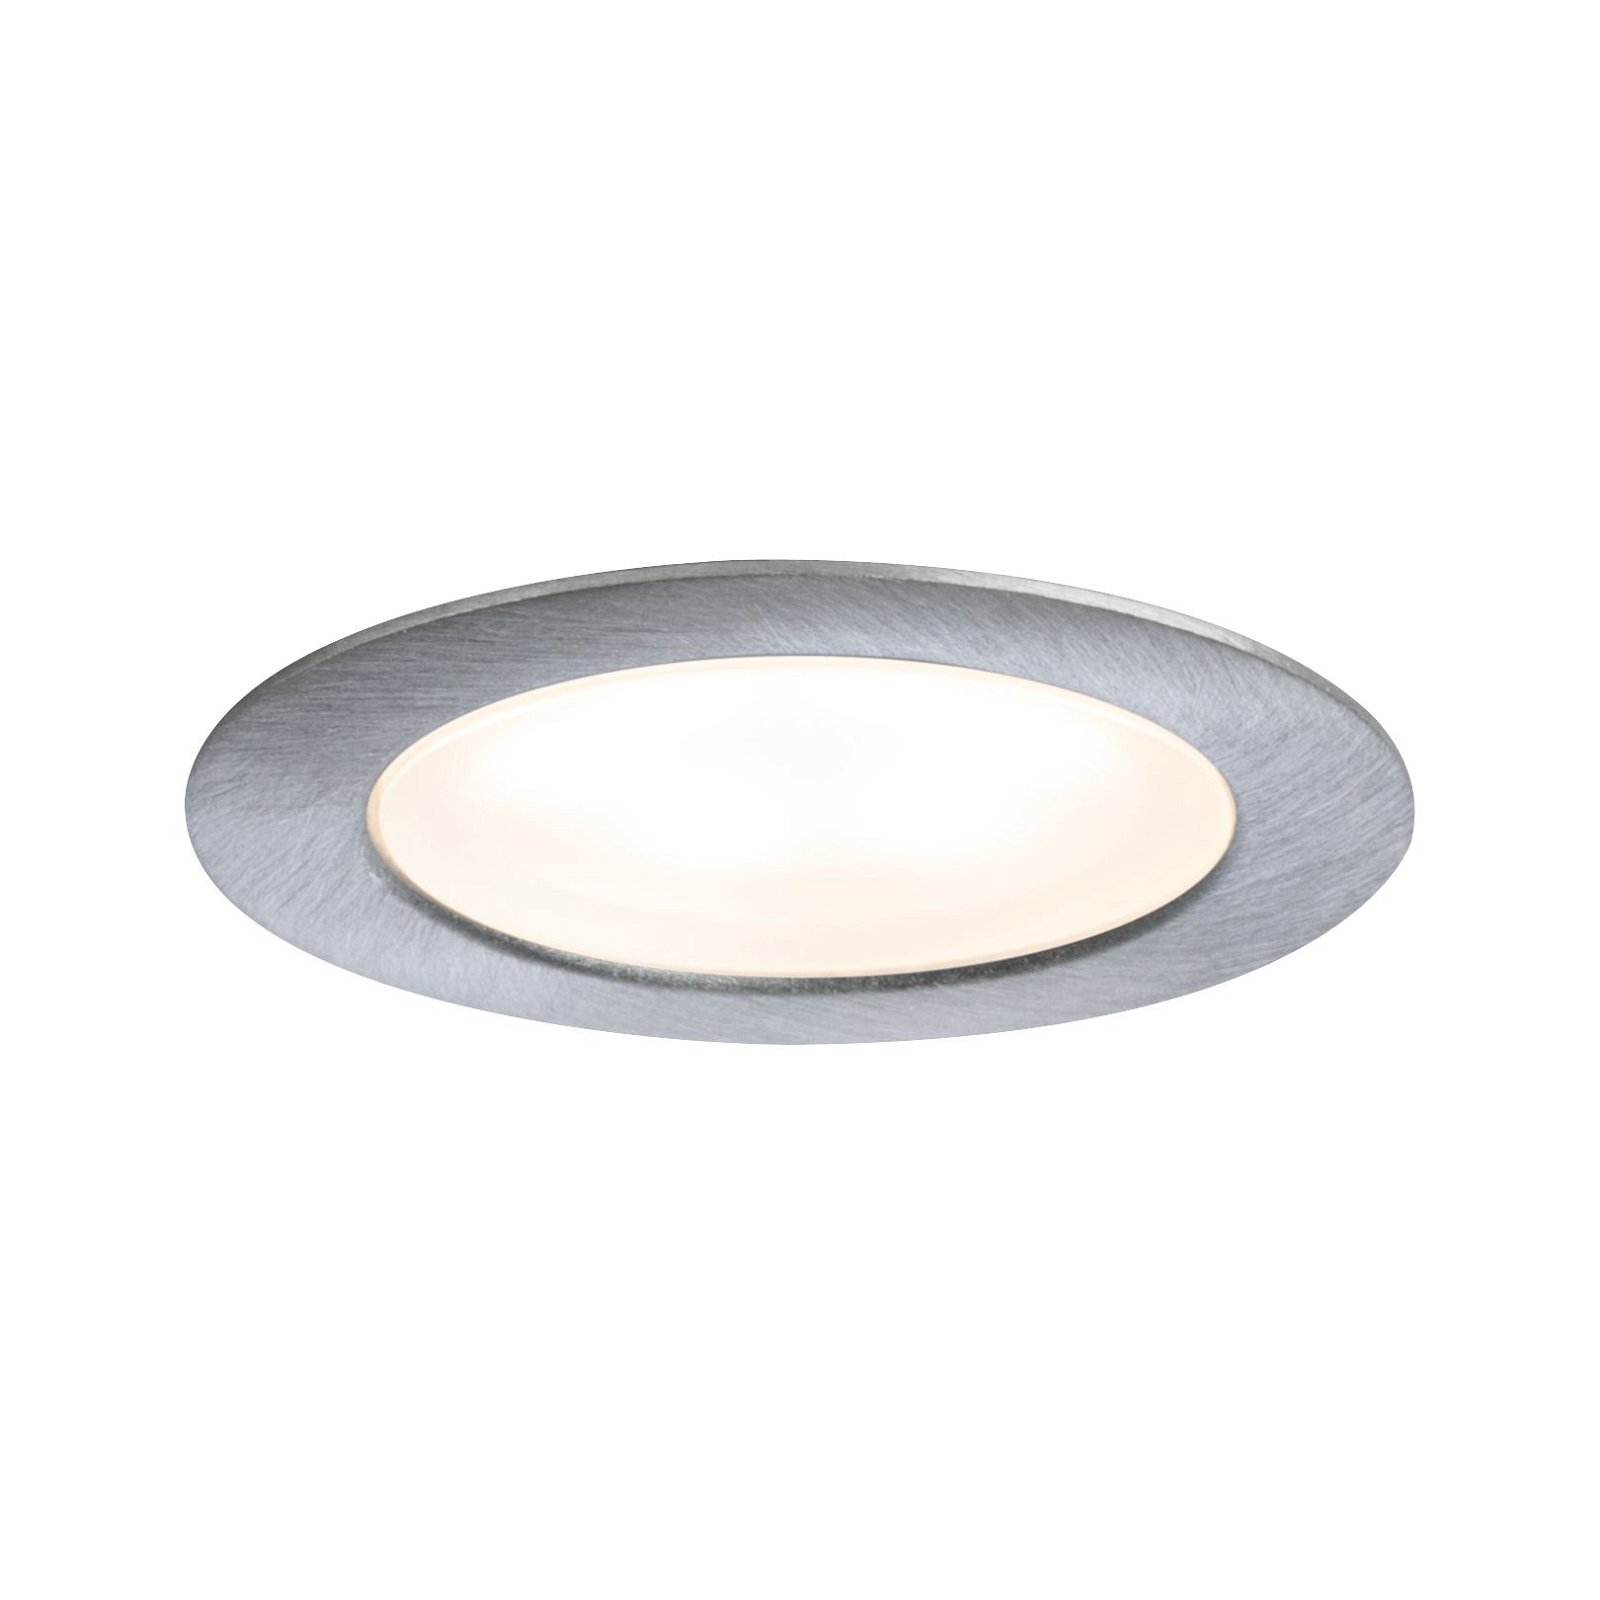 LED-meubelinbouwlampen Micro Line Mini rond 35mm 5x0,4W 5x20lm 230/12V 2700K Staal geborsteld